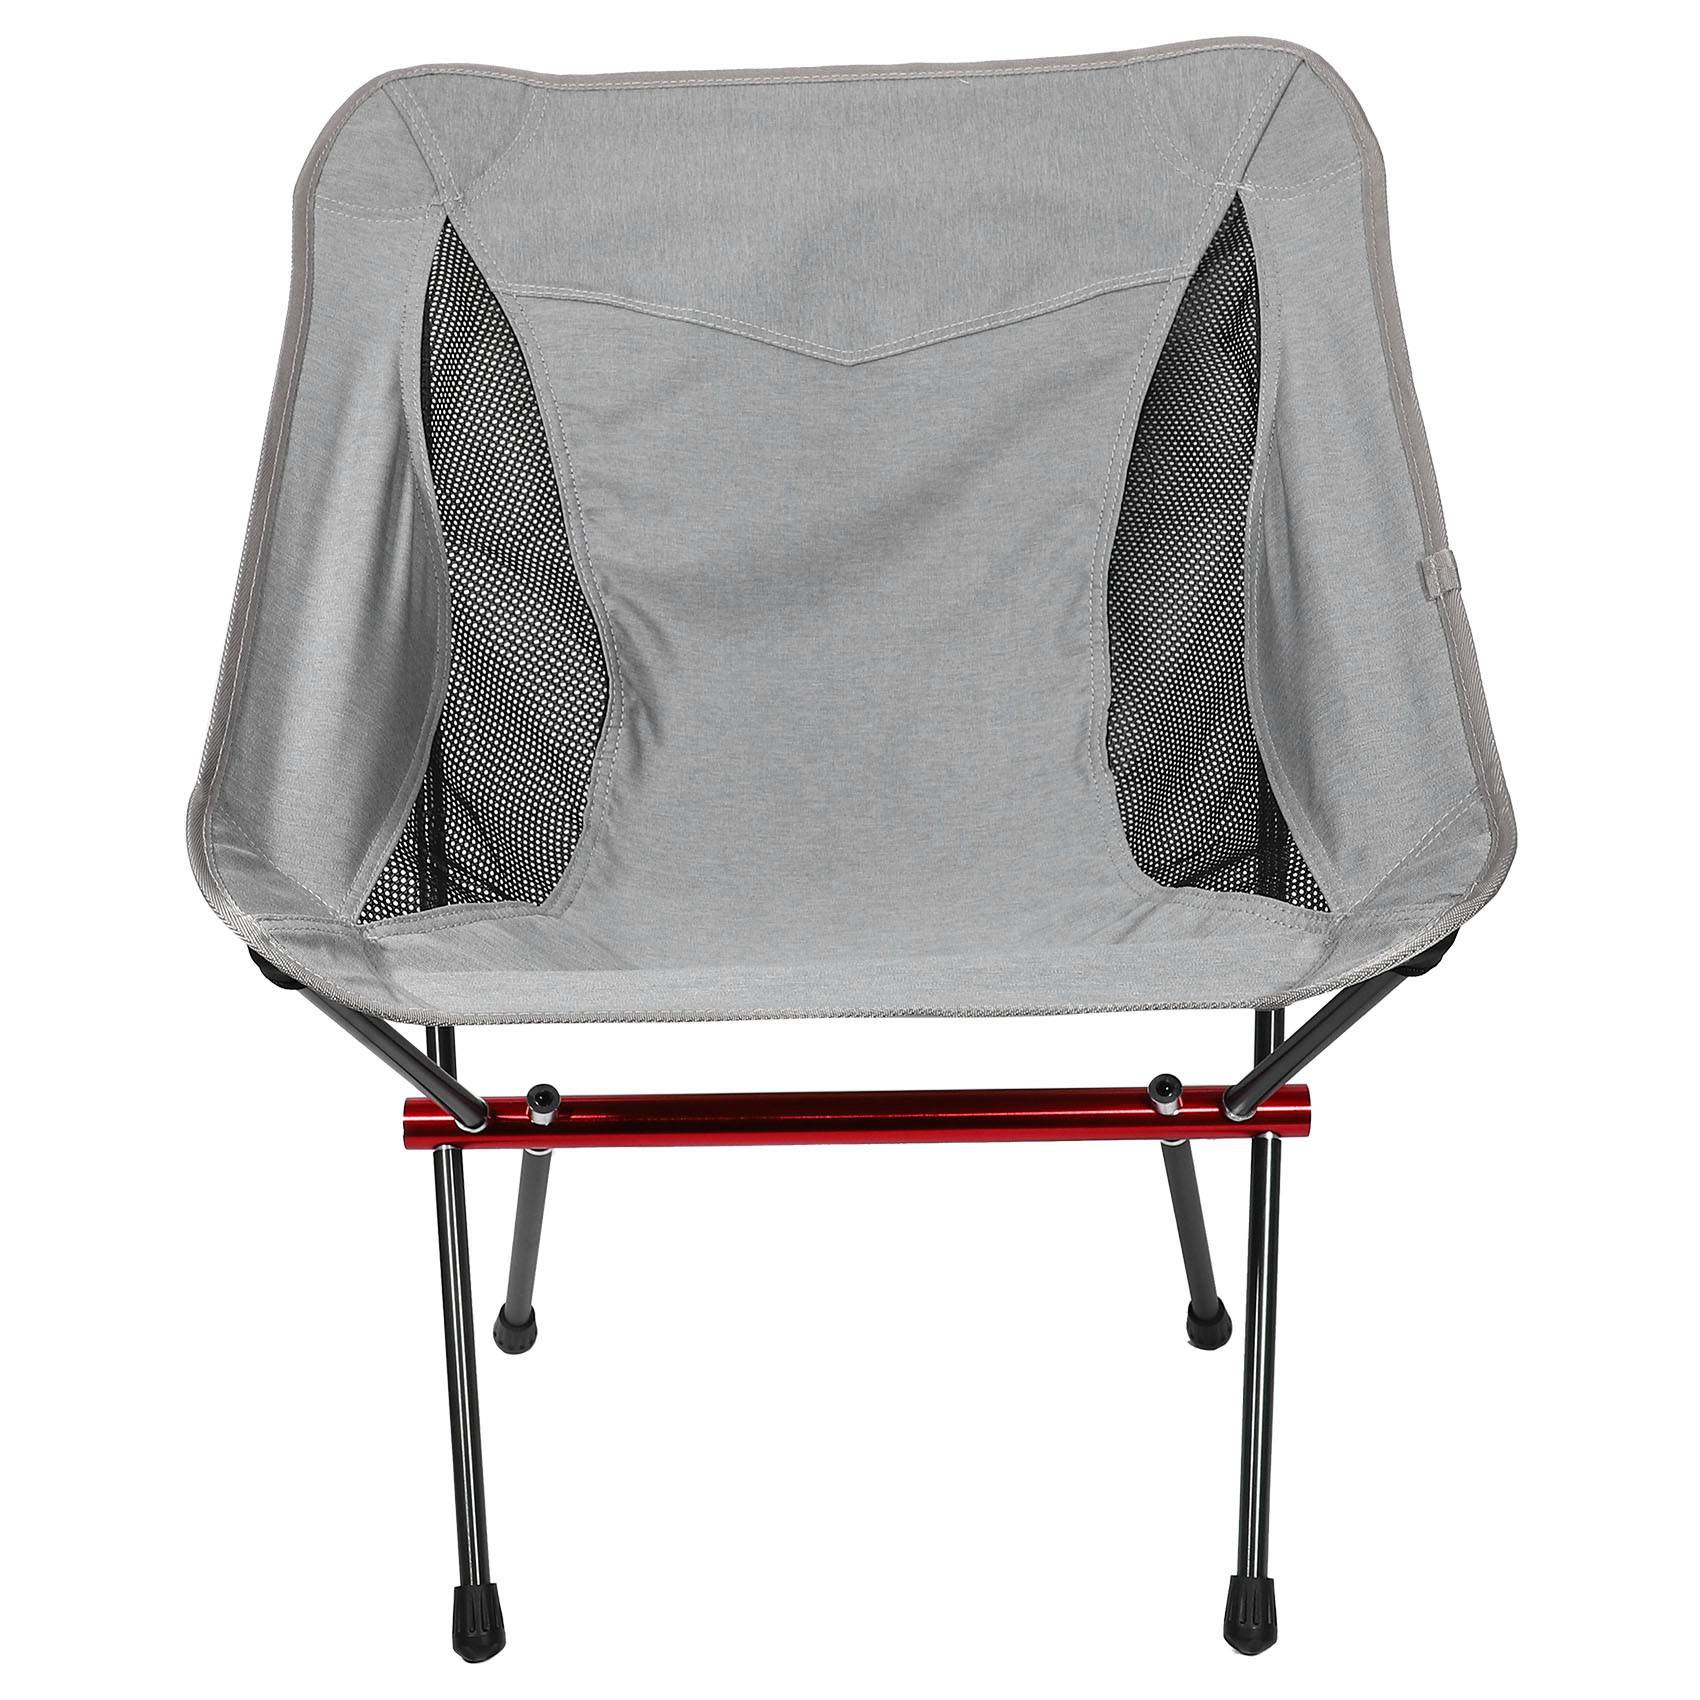 lightweight compact portable outdoor folding beach chair fishing picnic  chair foldable camping chair gray